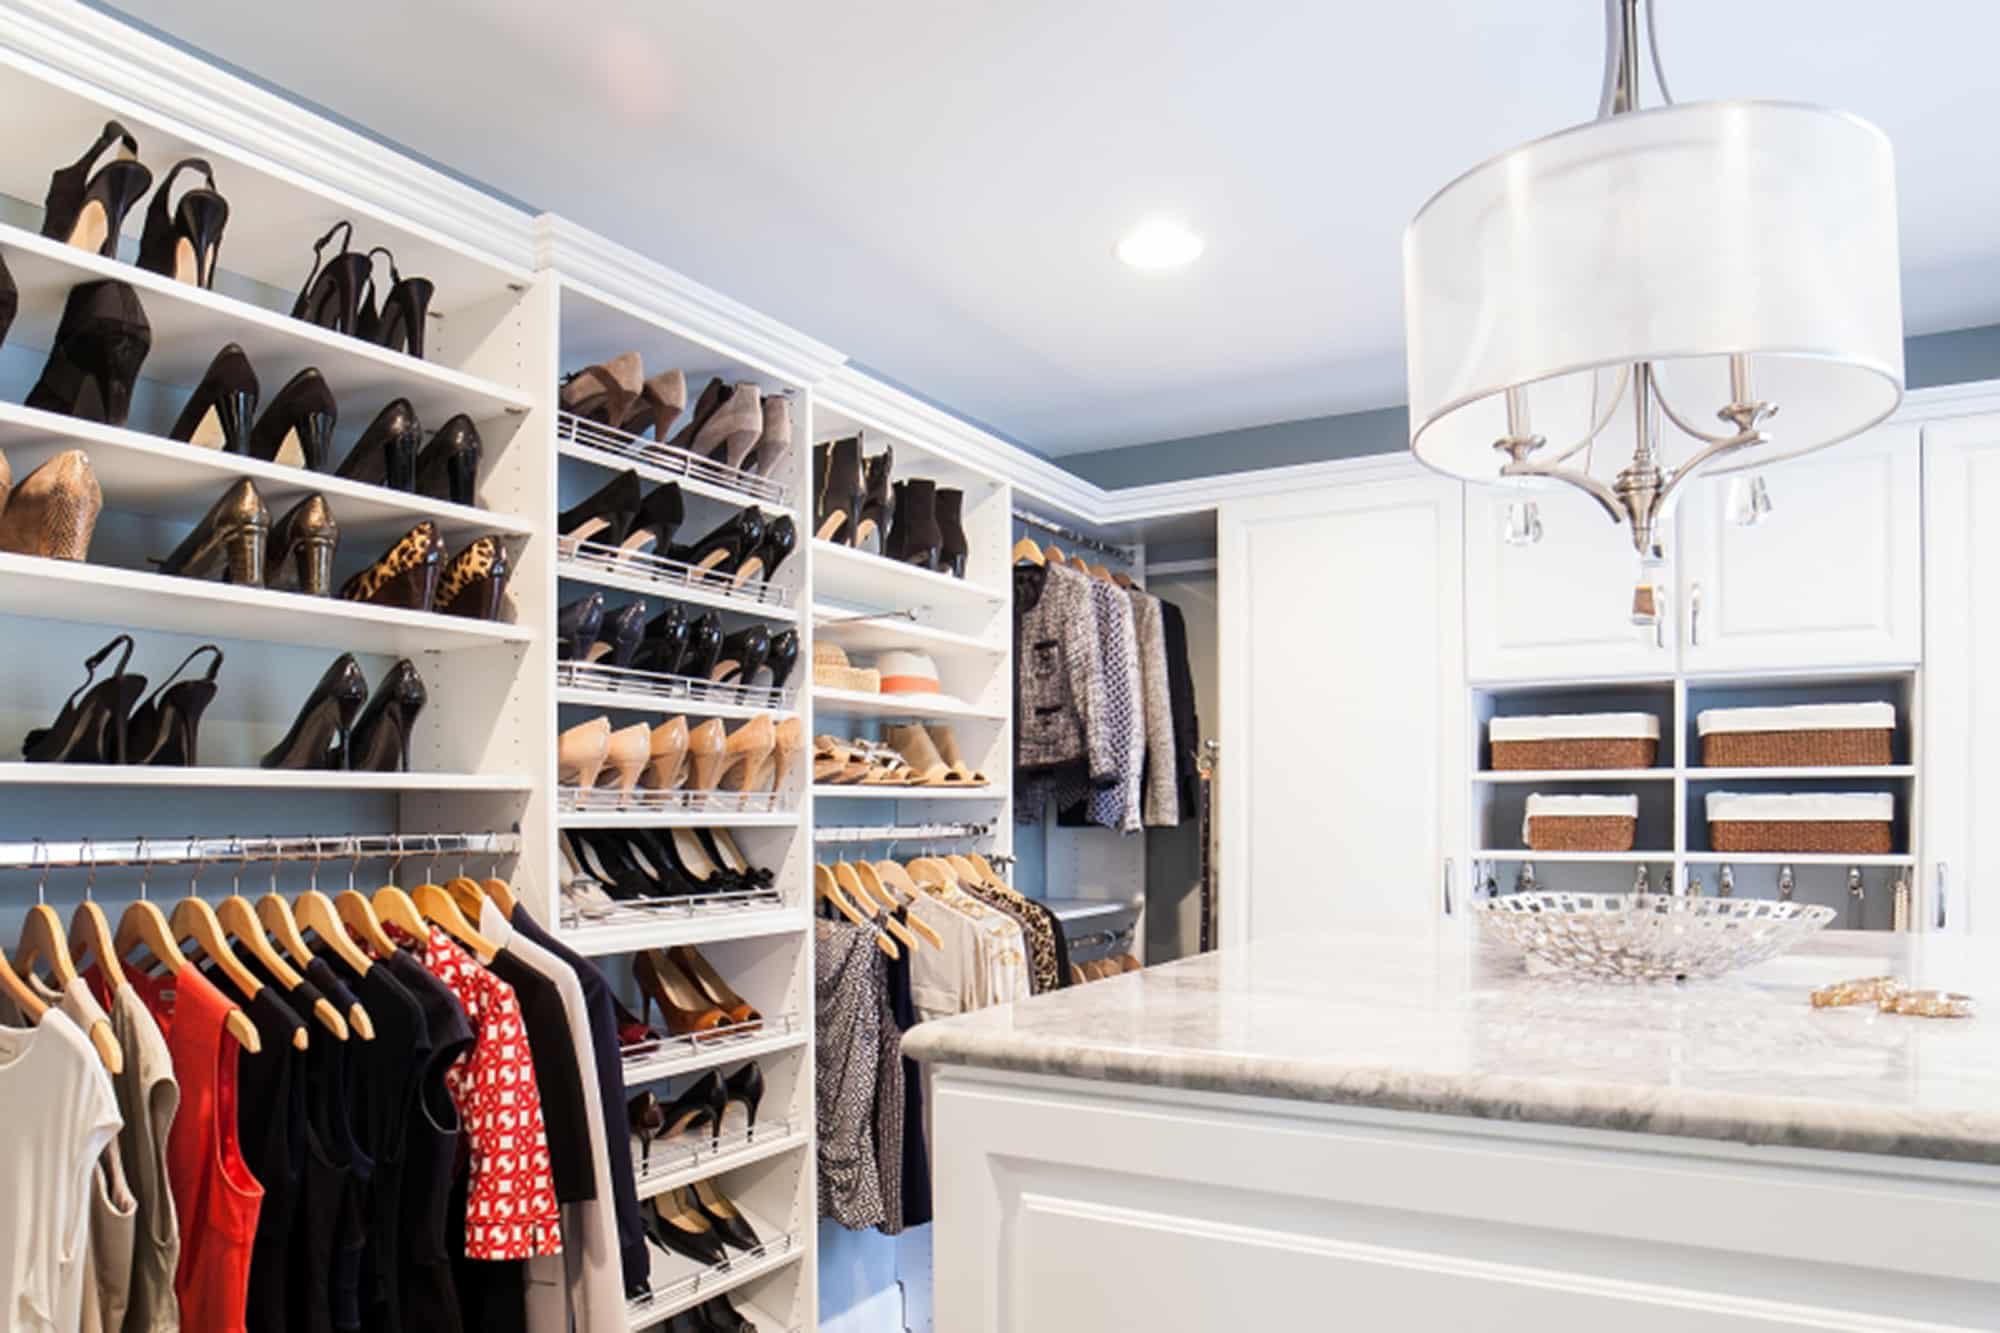 Large closet organizer system with white cabinetry for shoes and other clothing